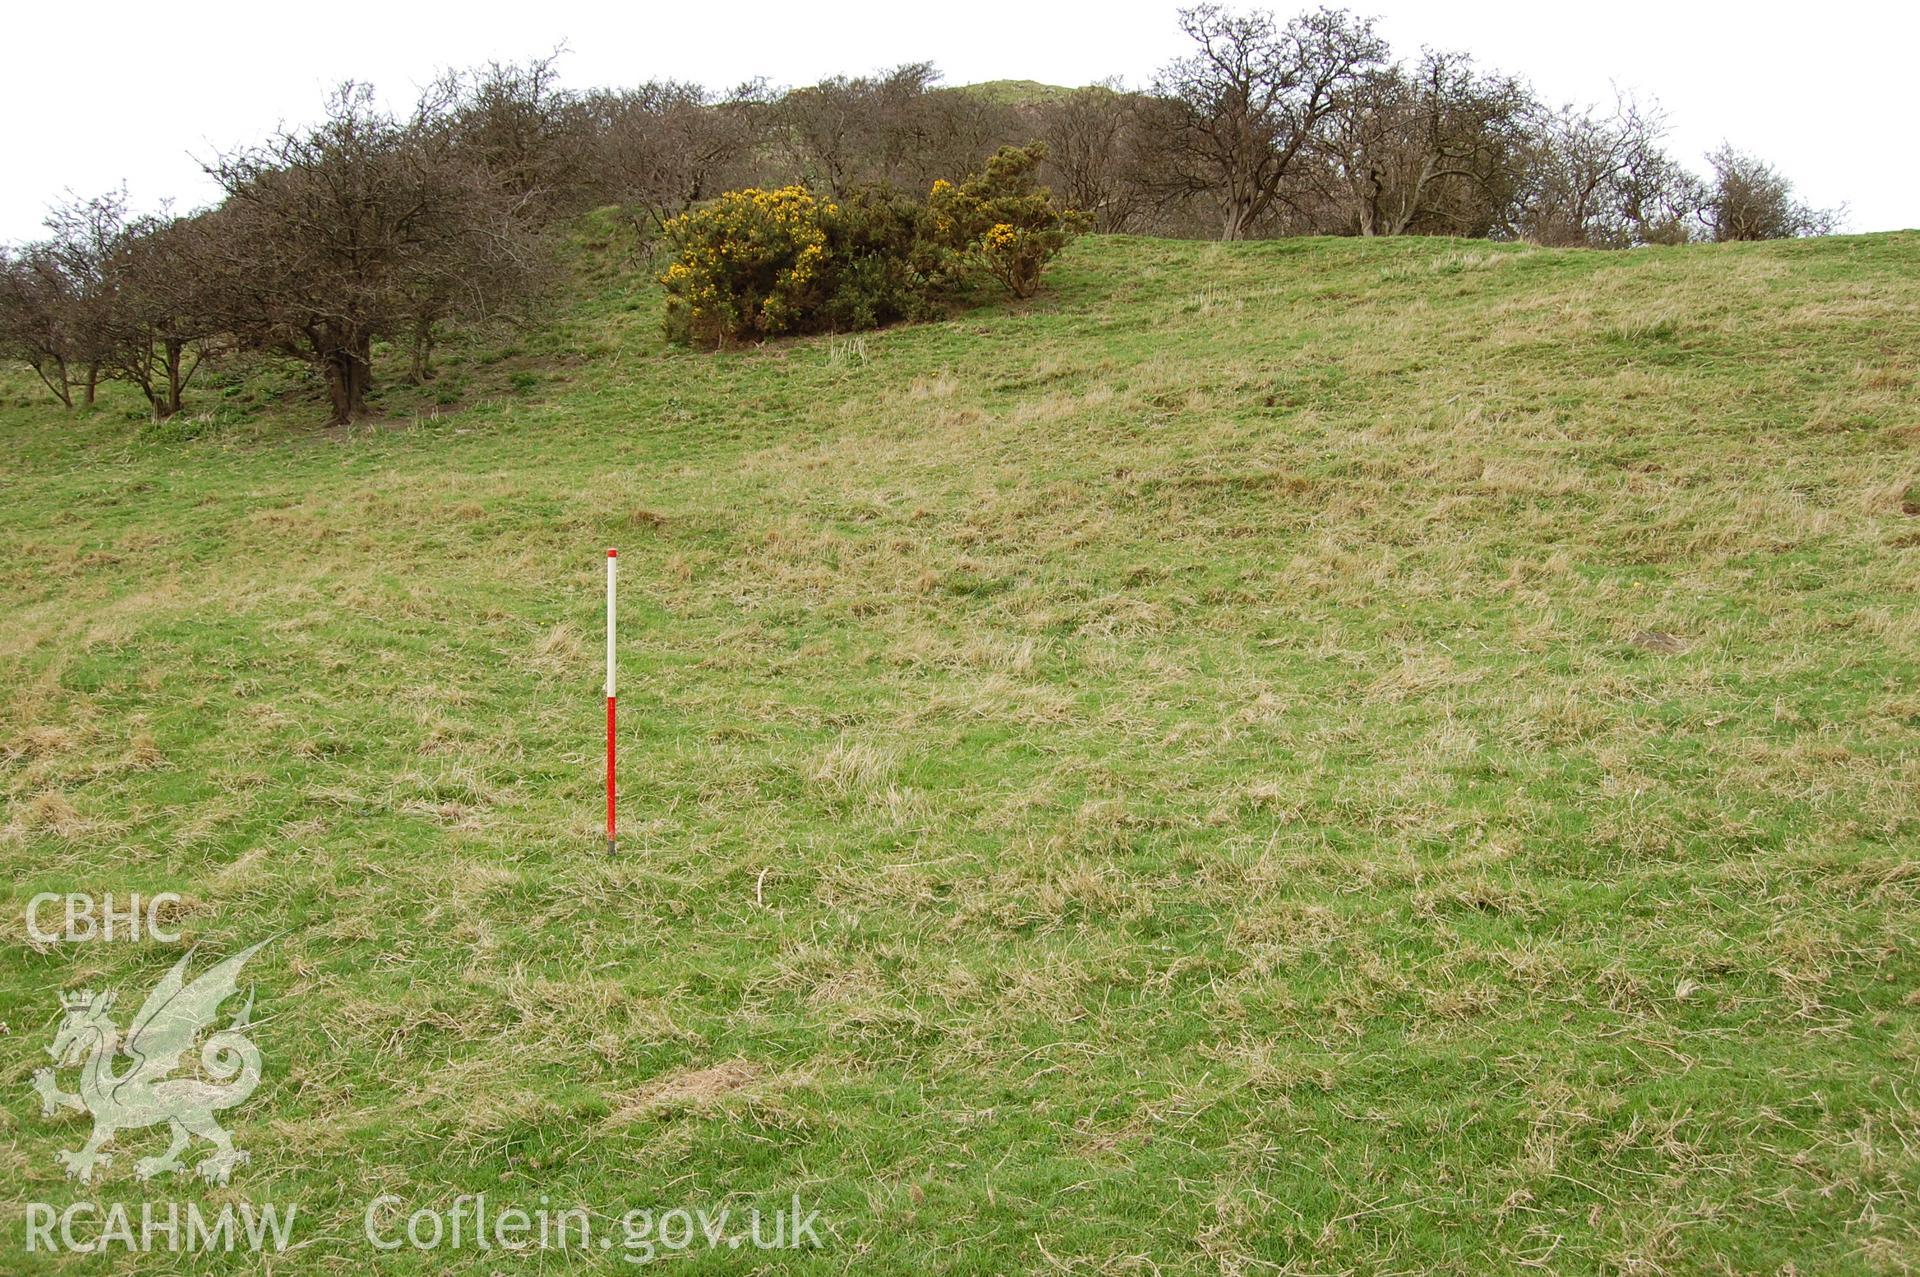 Digital photograph from an archaeological assessment of Deganwy Castle, carried out by Gwynedd Archaeological Trust, 2009. House platform in South settlement.